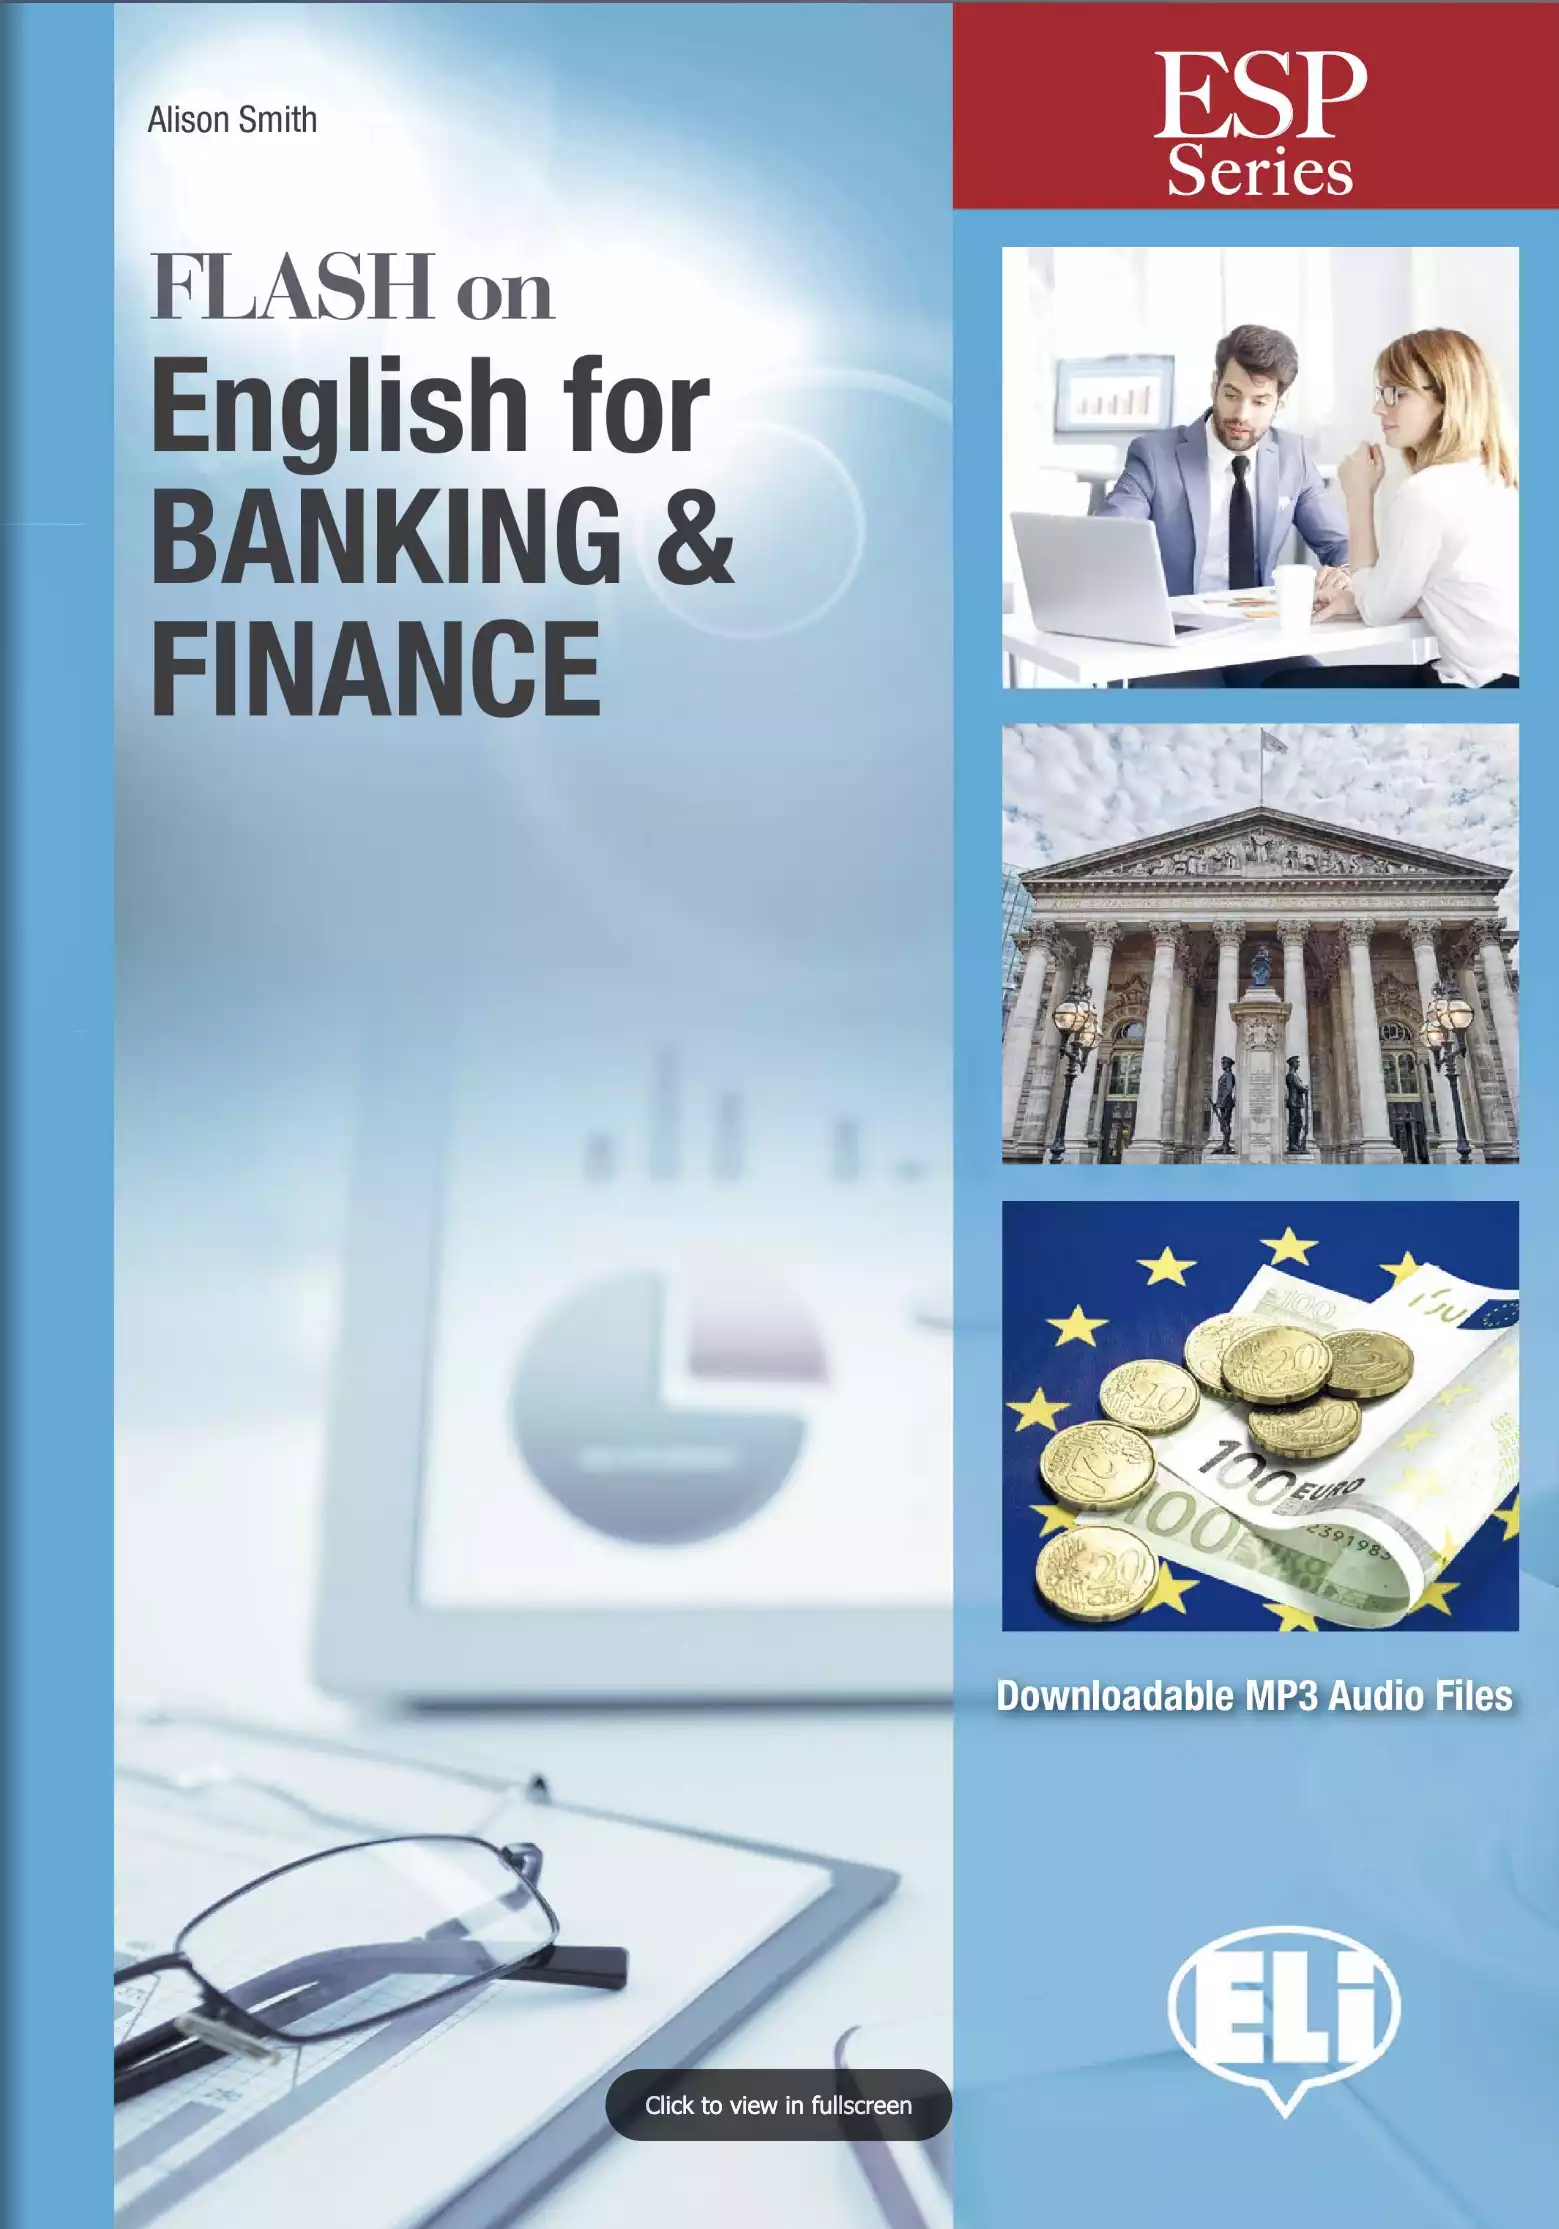 Flash on english for banking & finance